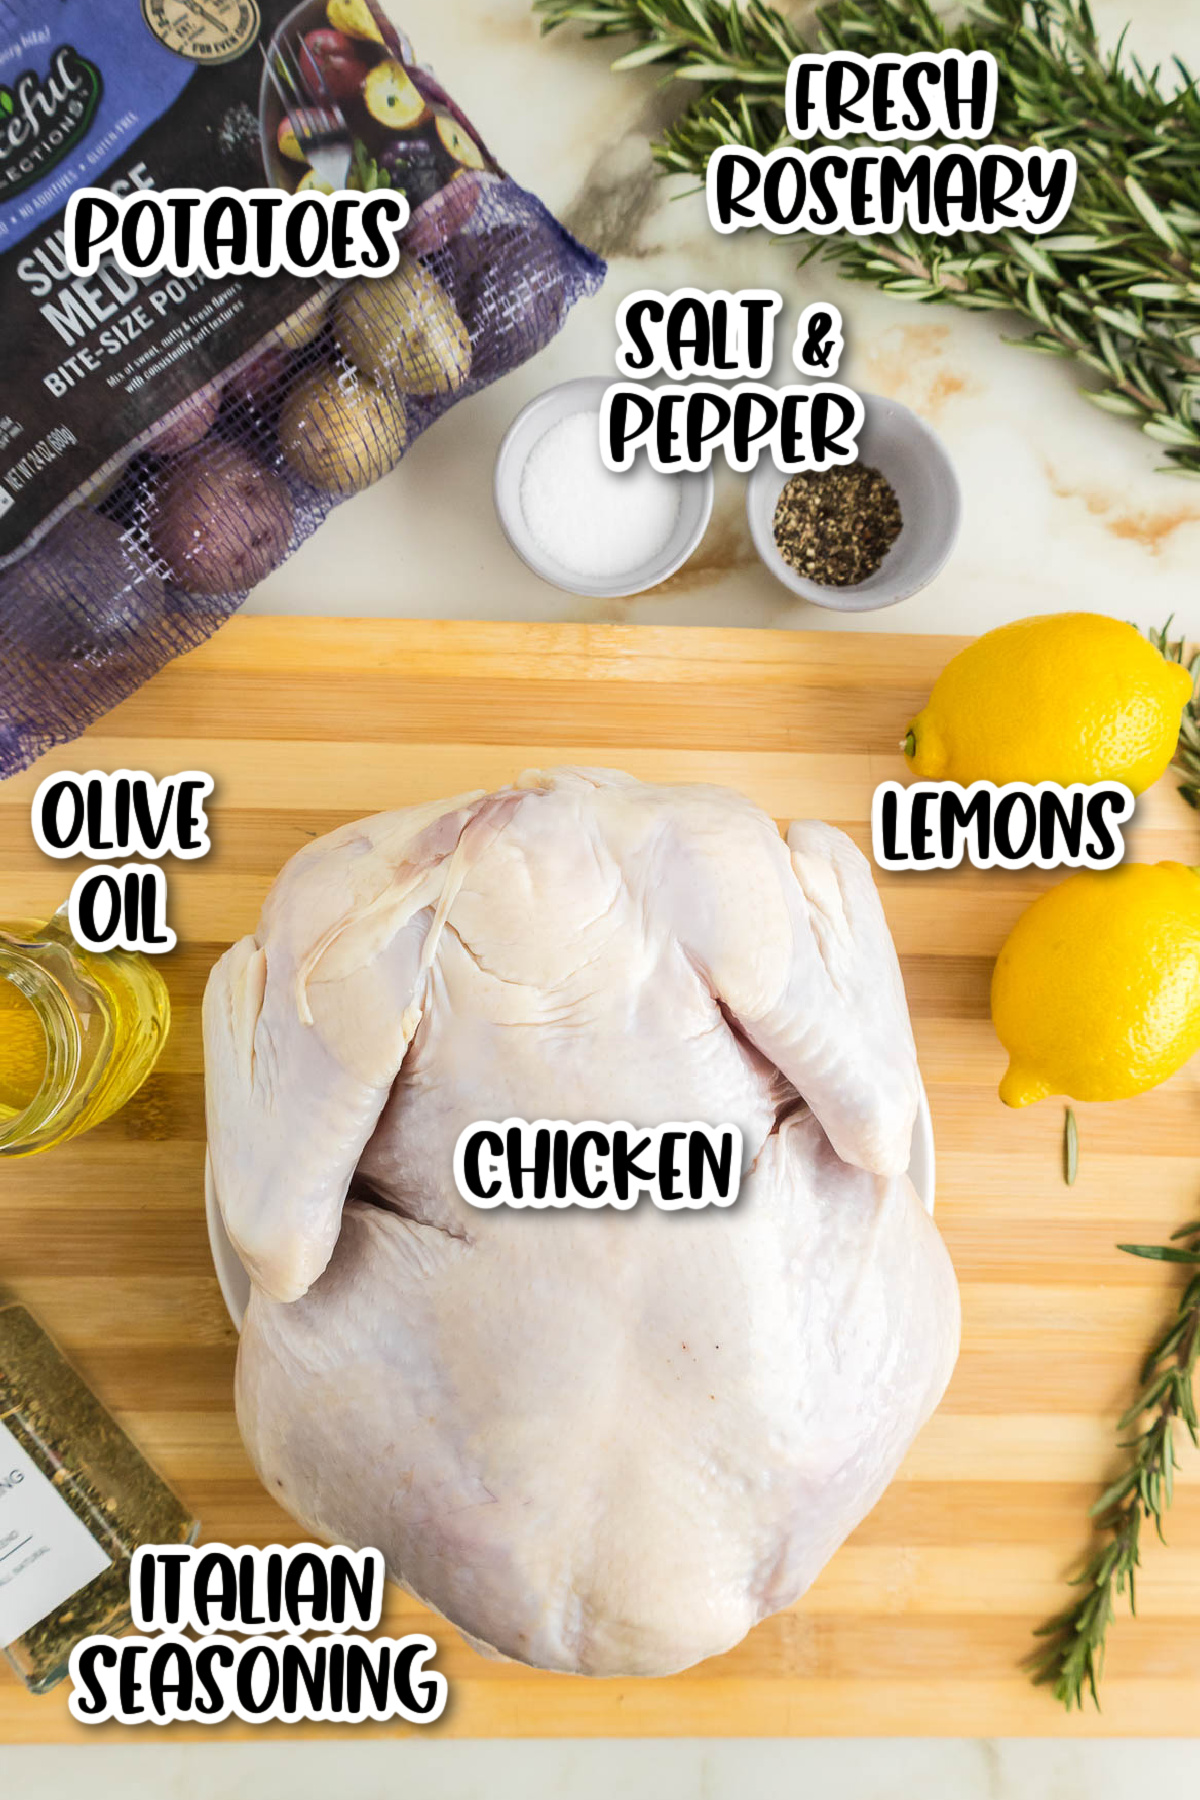 A cutting board with ingredients for lemon rosemary chicken.